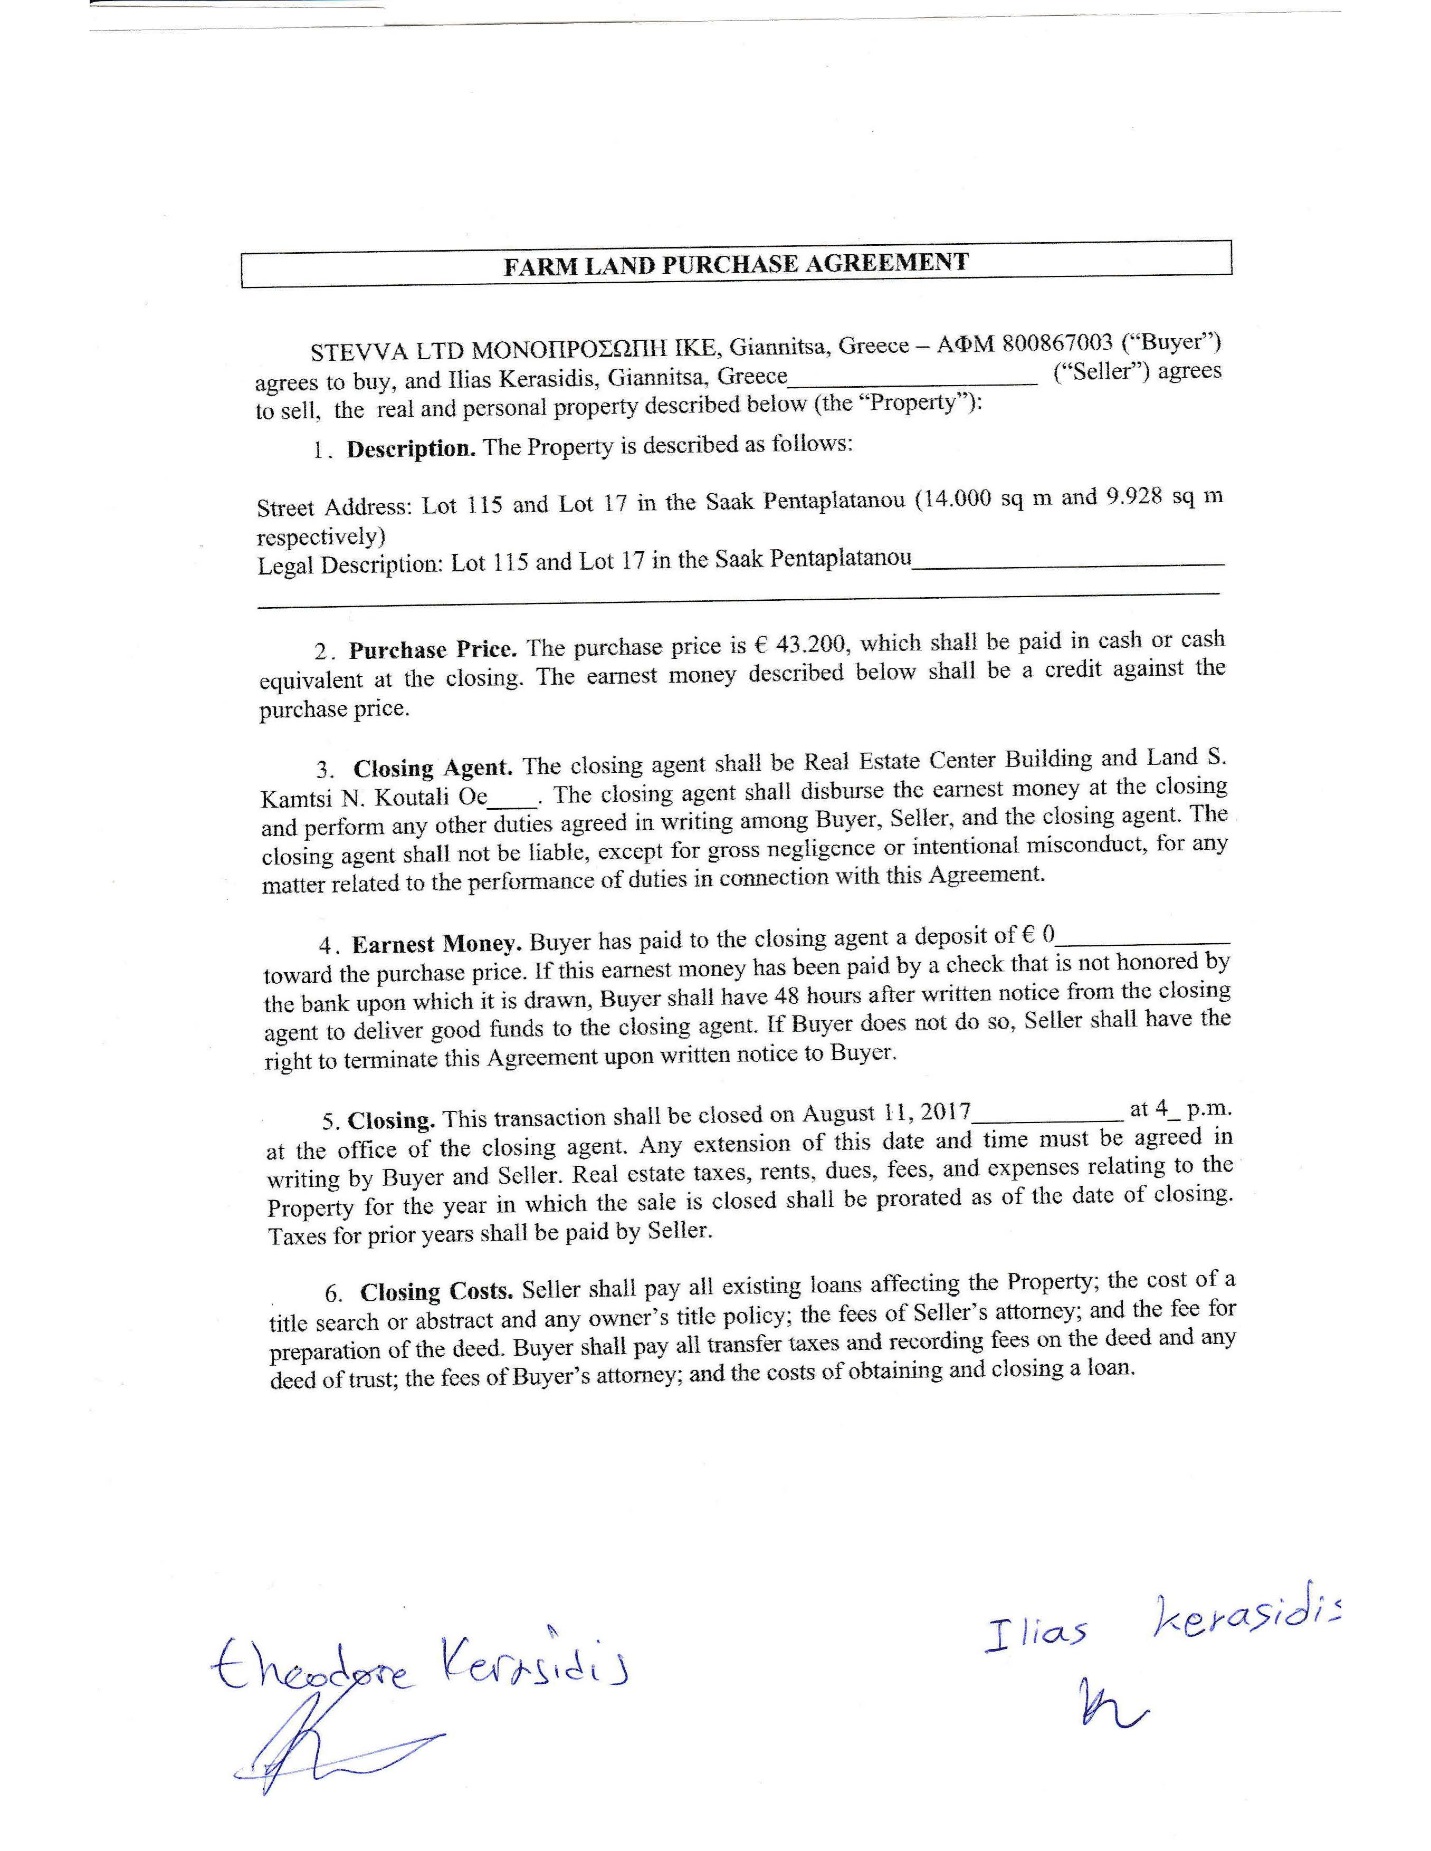 Ex 10.02 Farm Land Purchase Agreement_Page_1.jpg